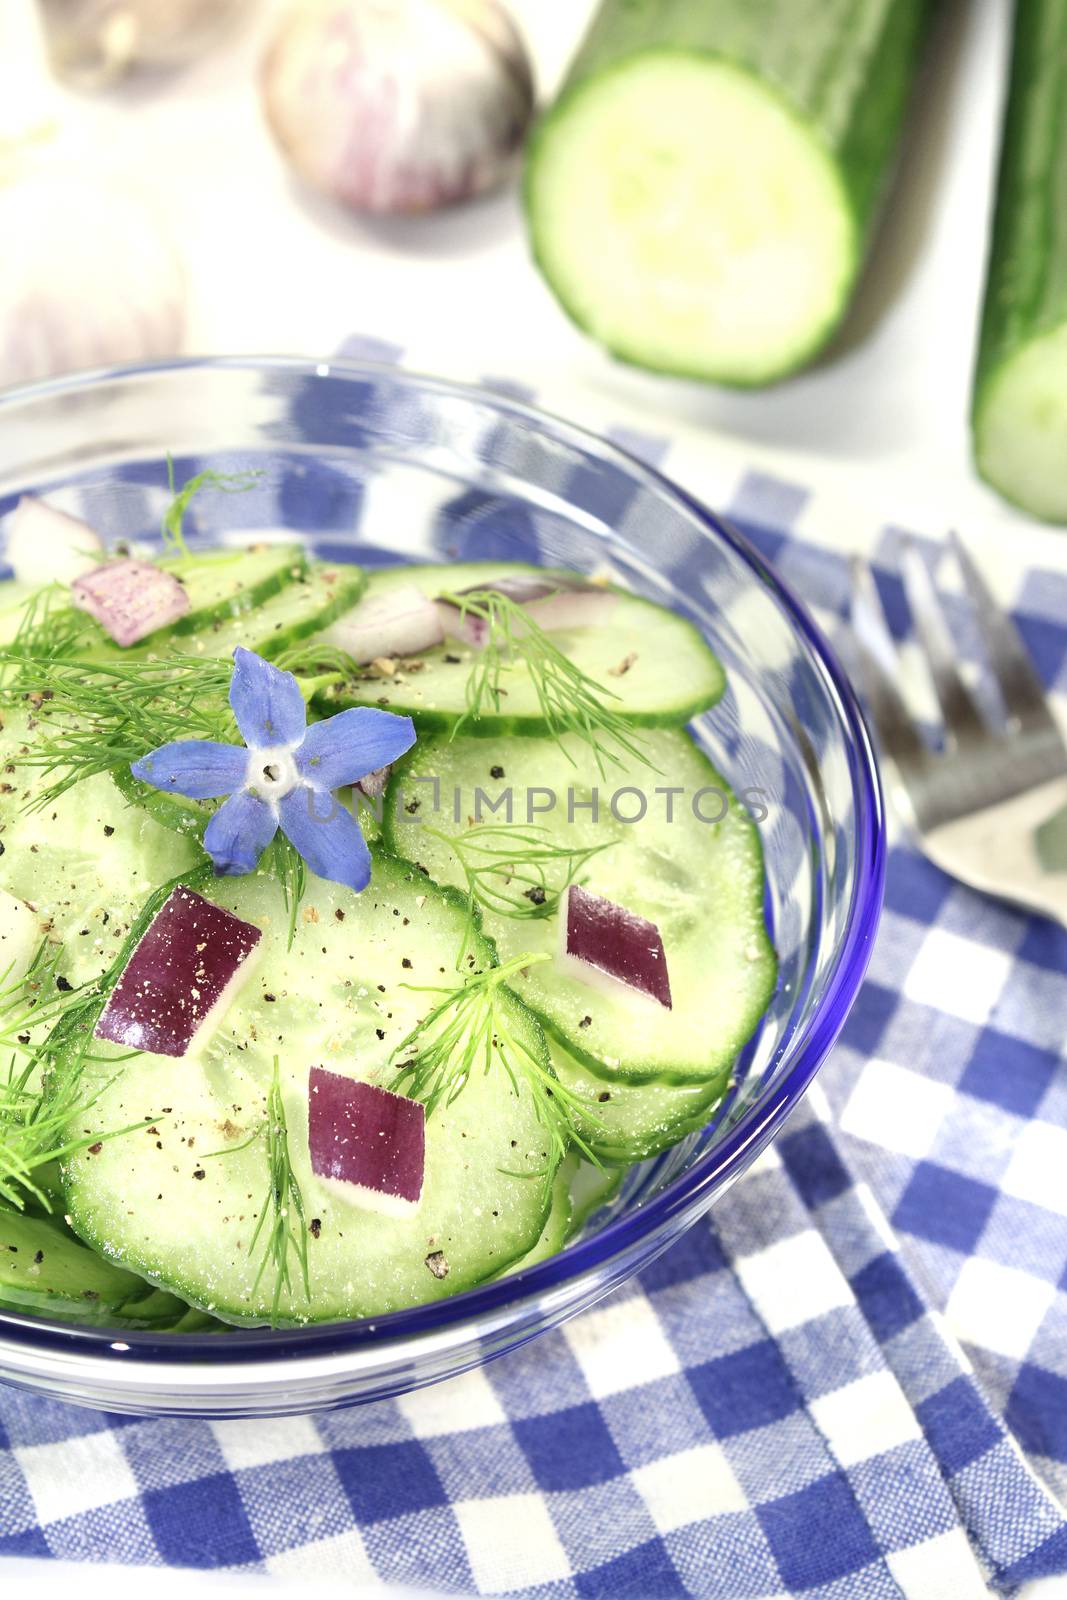 Cucumber salad with onions, borage flower and dill